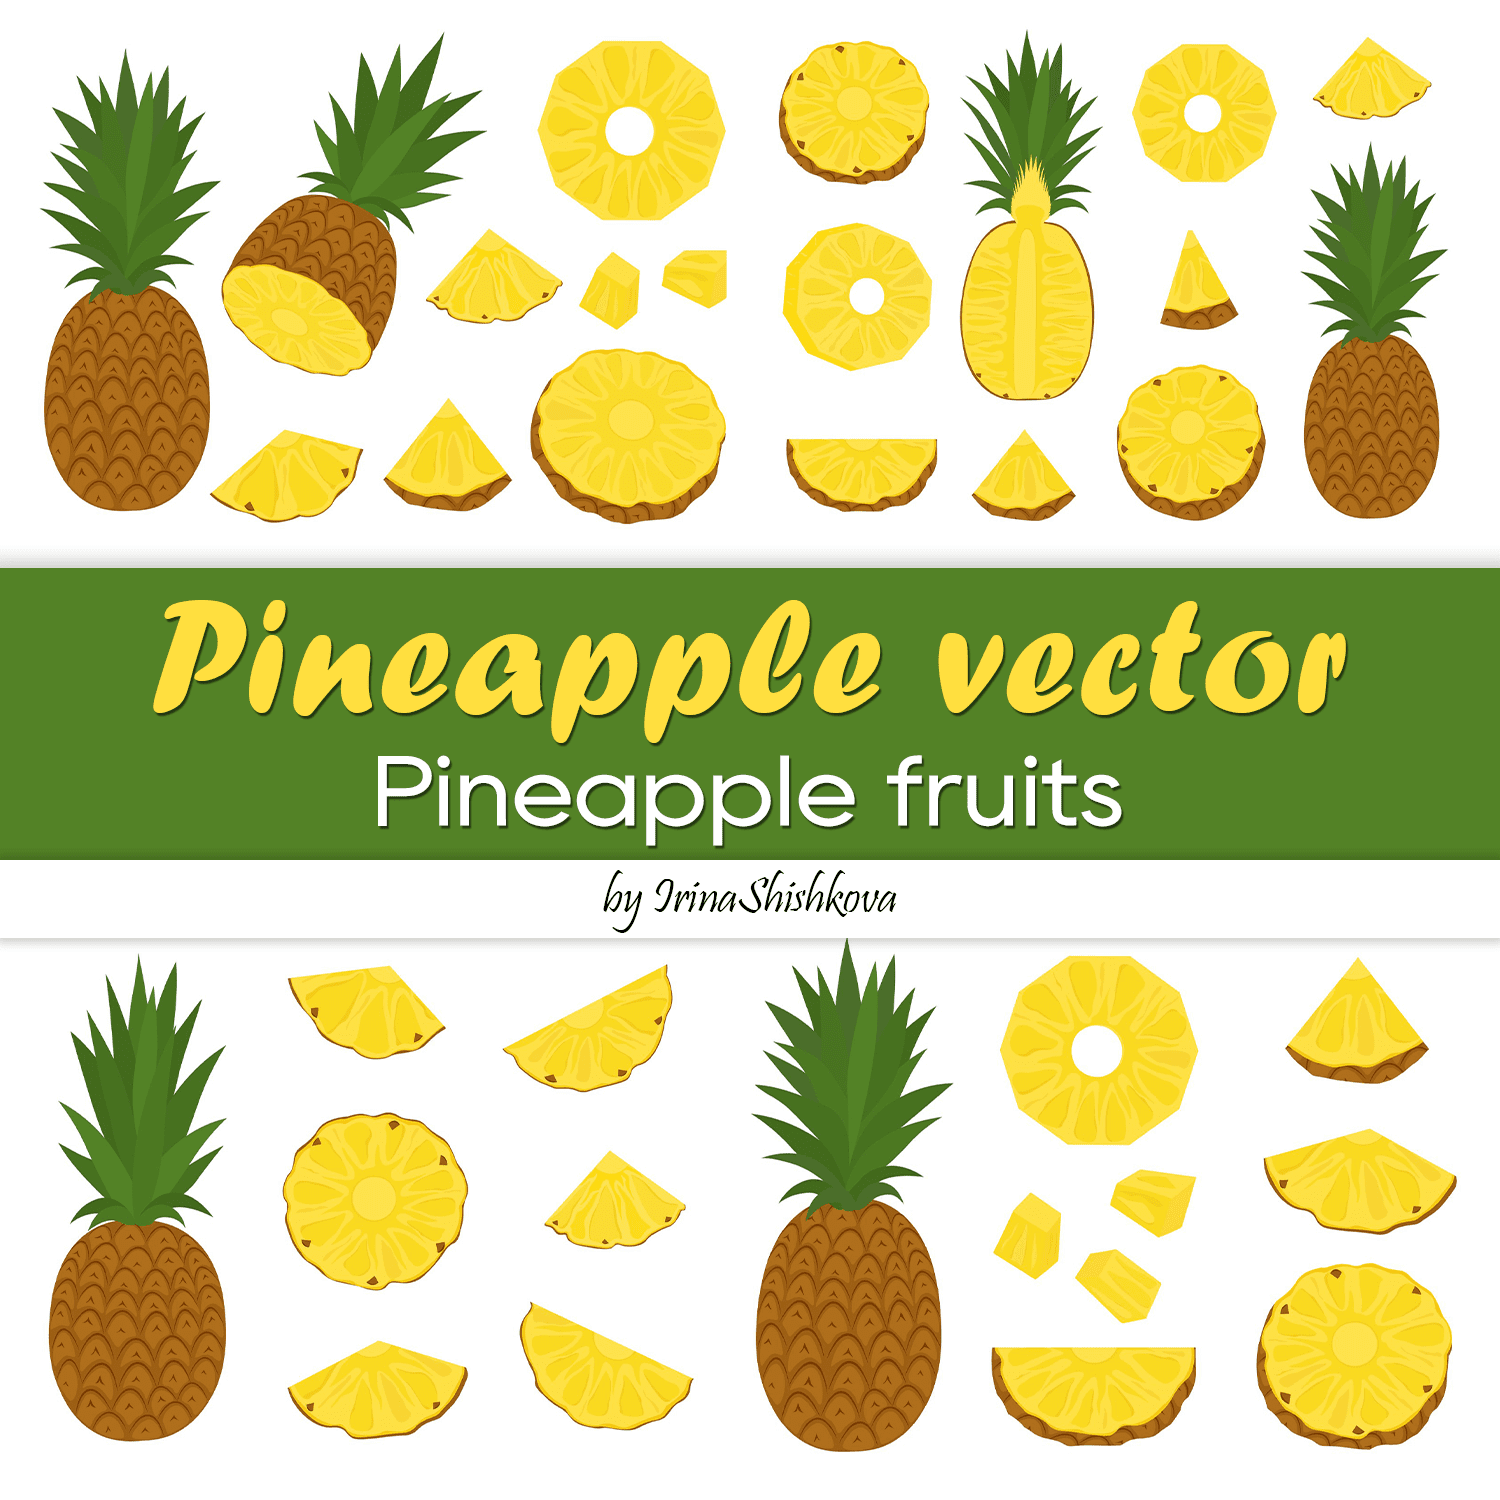 Pineapple vector. Pineapple fruits cover.